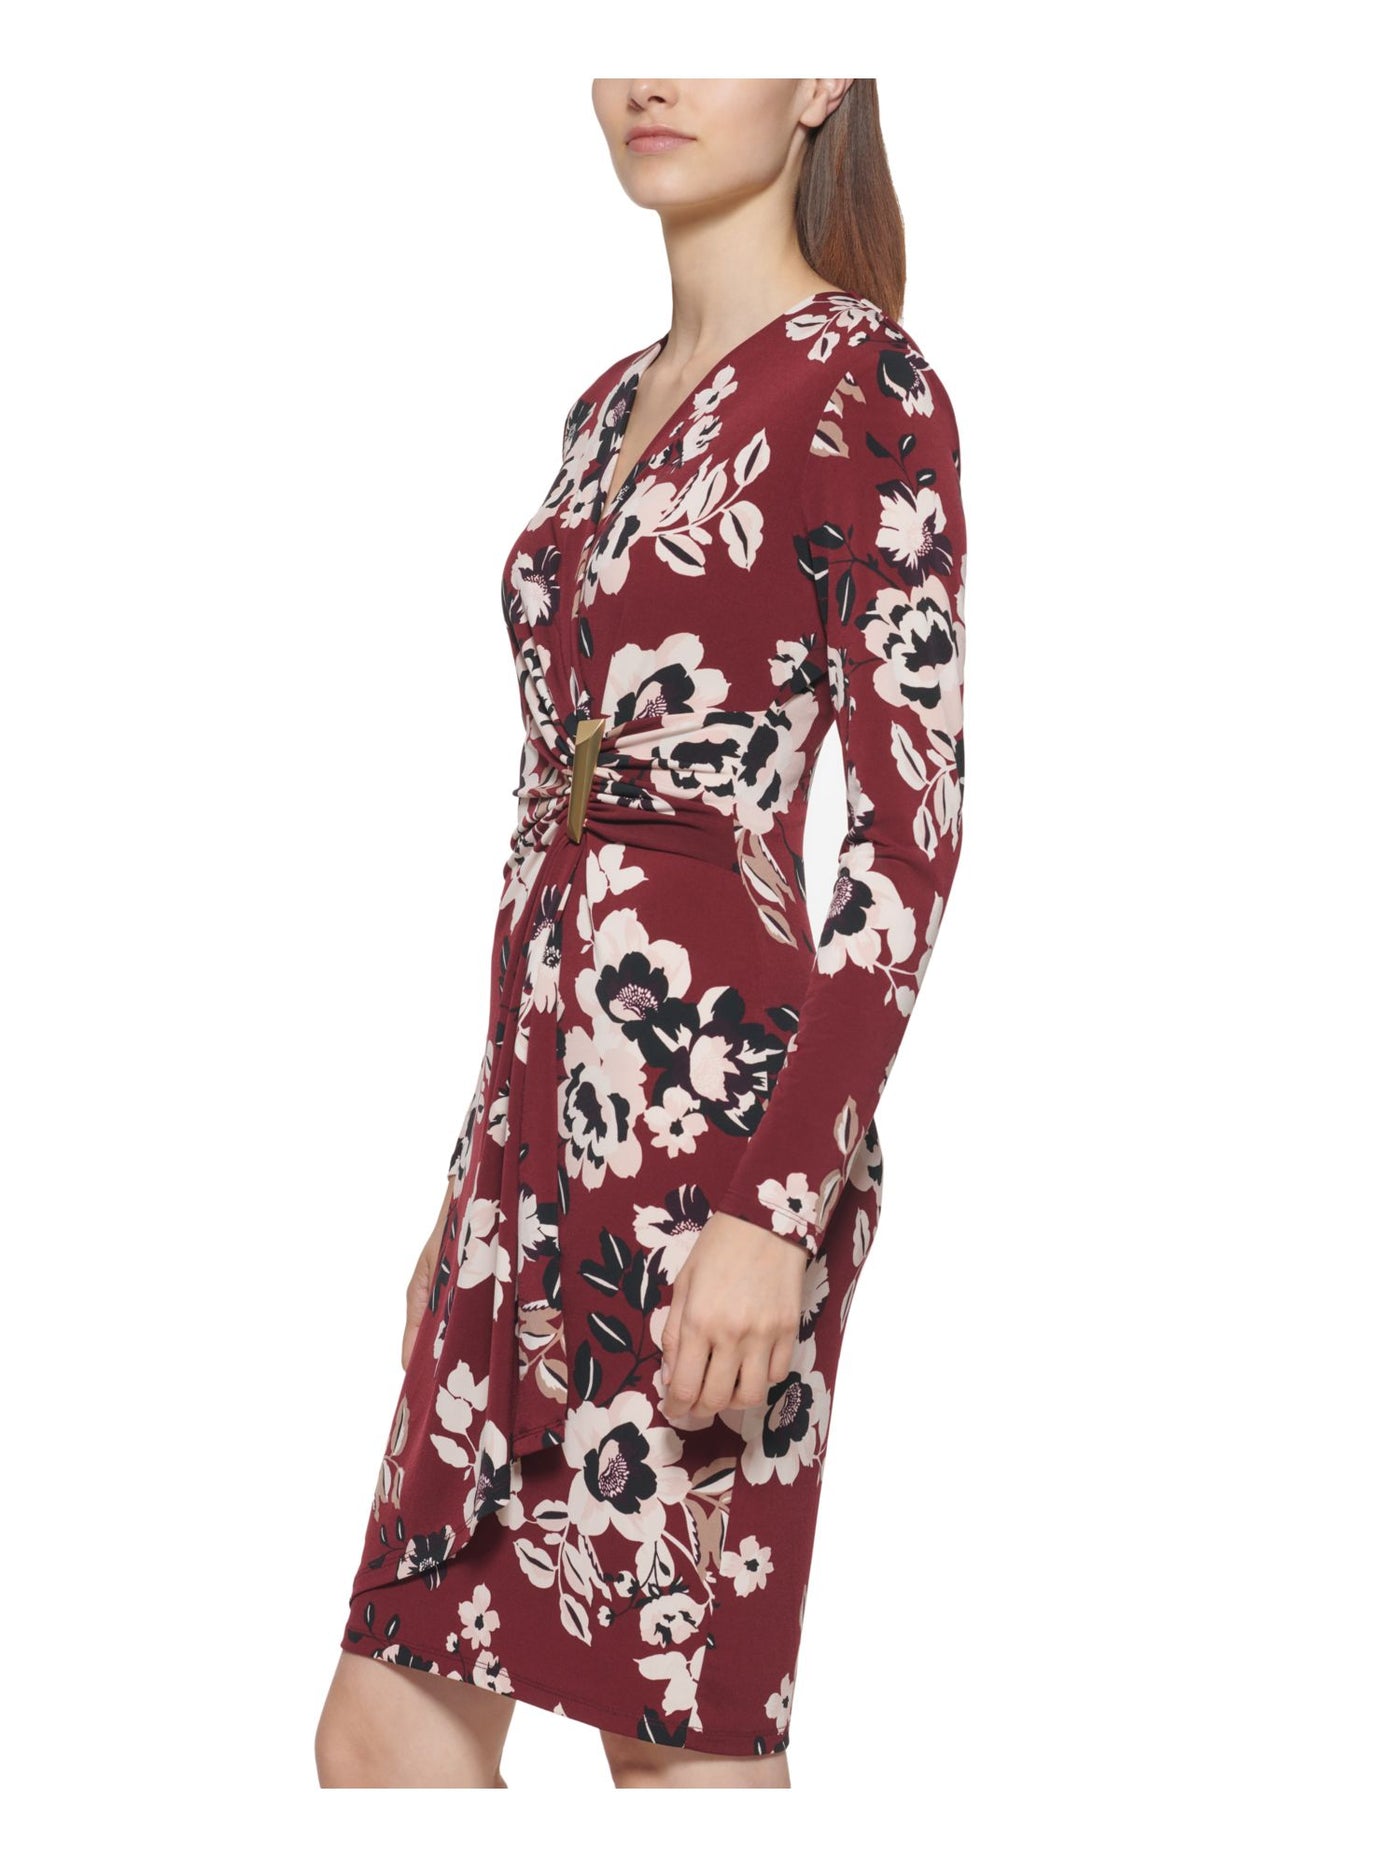 CALVIN KLEIN Womens Maroon Ruched Hardware Detail Unlined Floral Long Sleeve Surplice Neckline Above The Knee Party Faux Wrap Dress Petites 2P